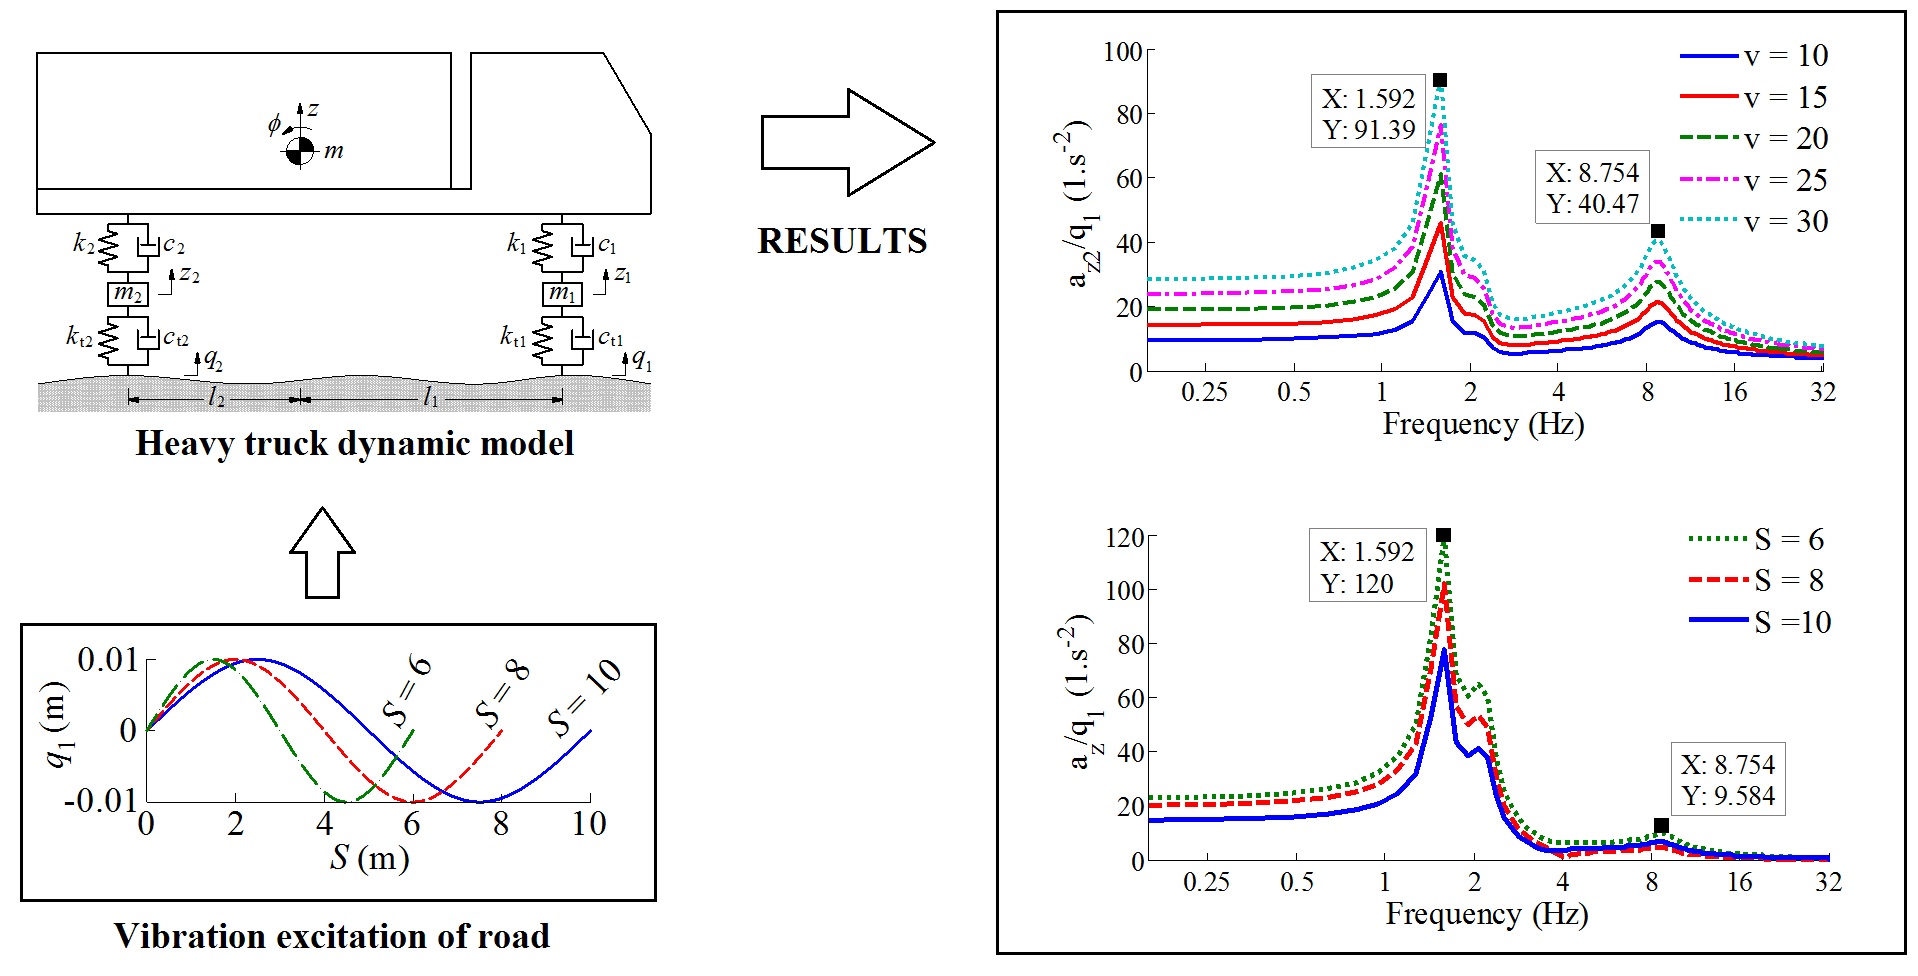 Low-frequency vibration analysis of heavy vehicle suspension system under various operating conditions